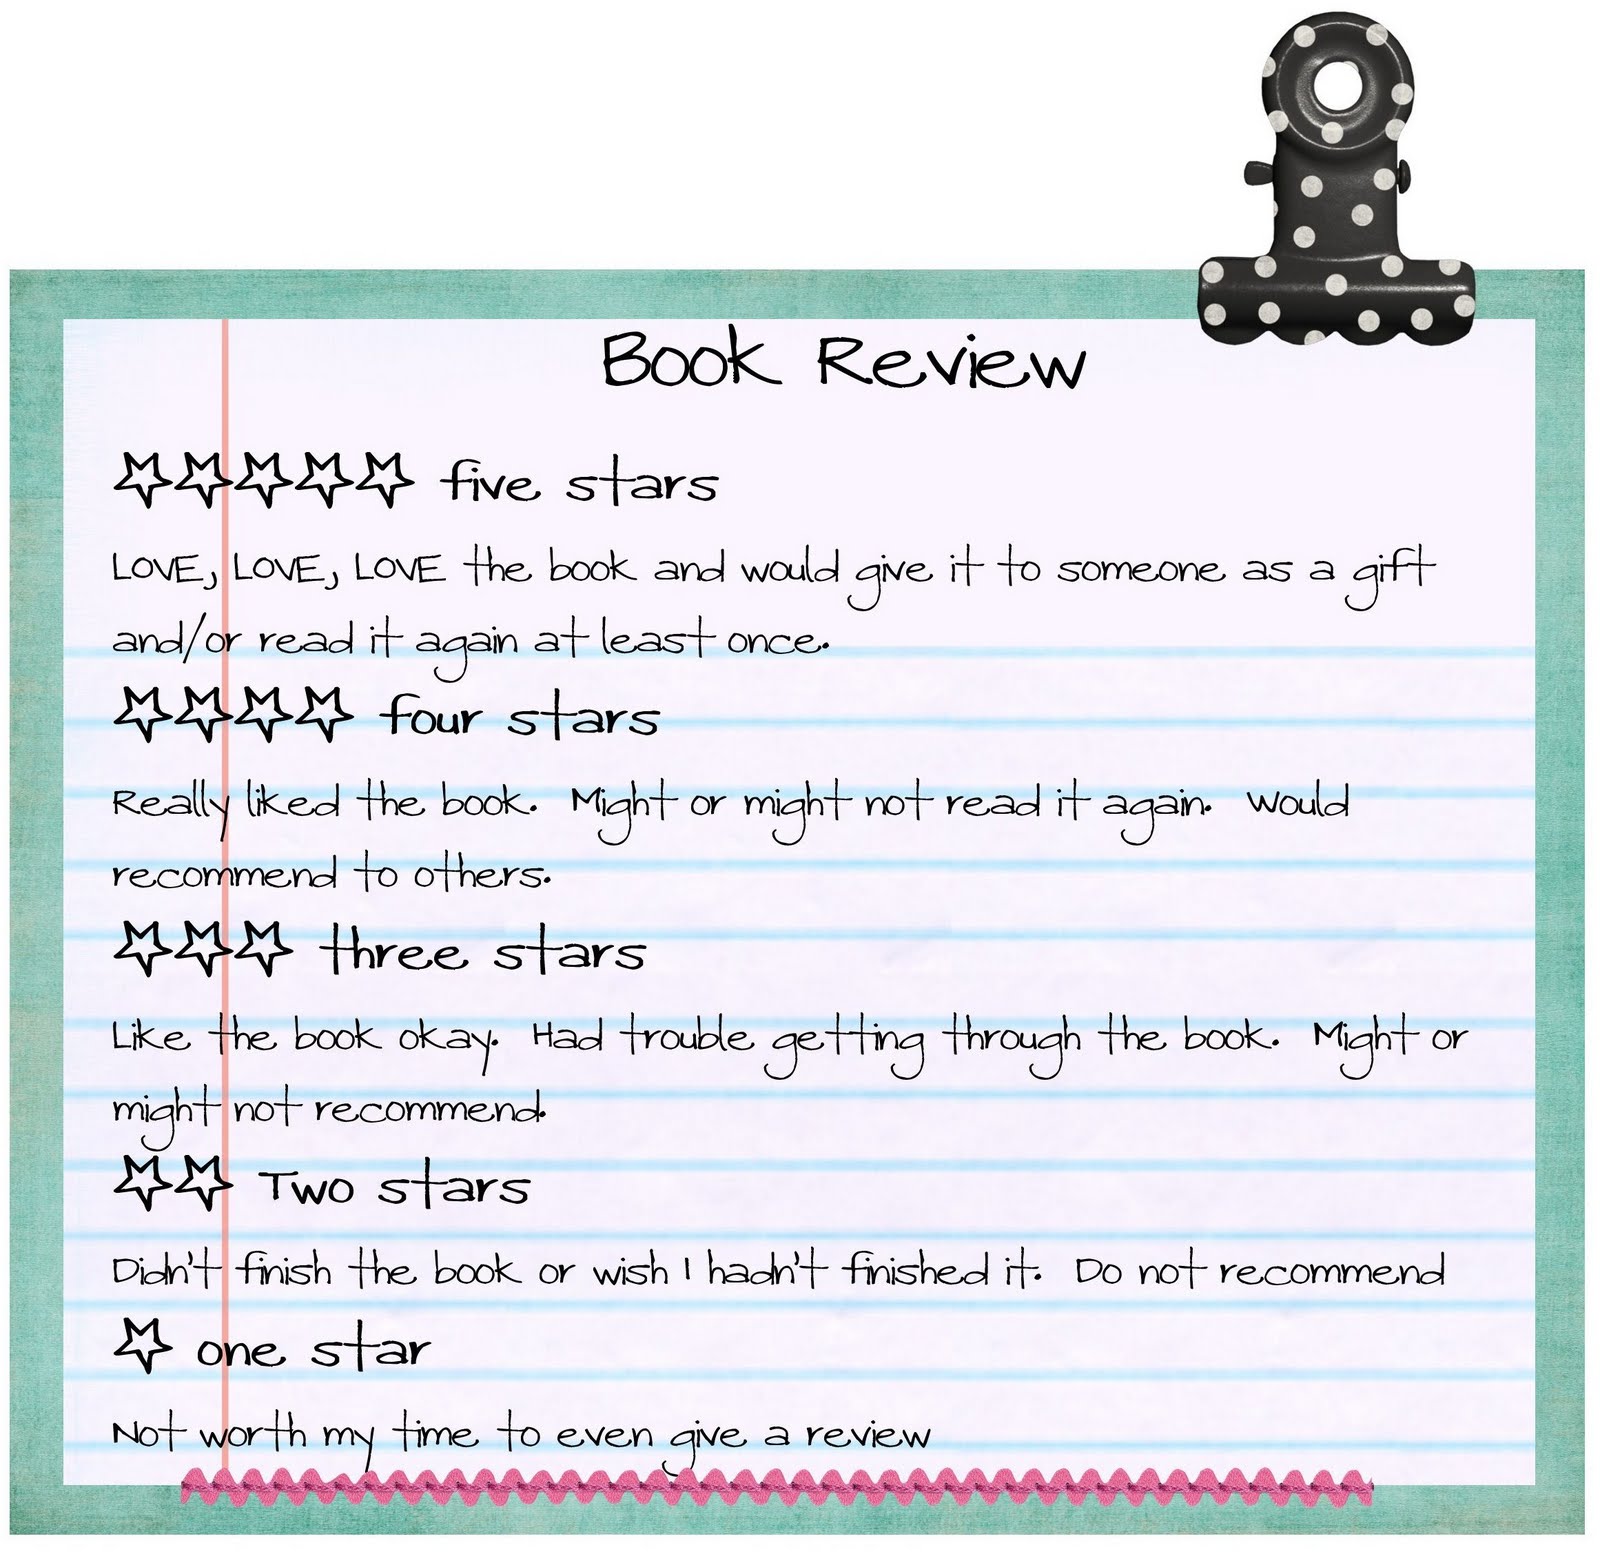 Format for a book review